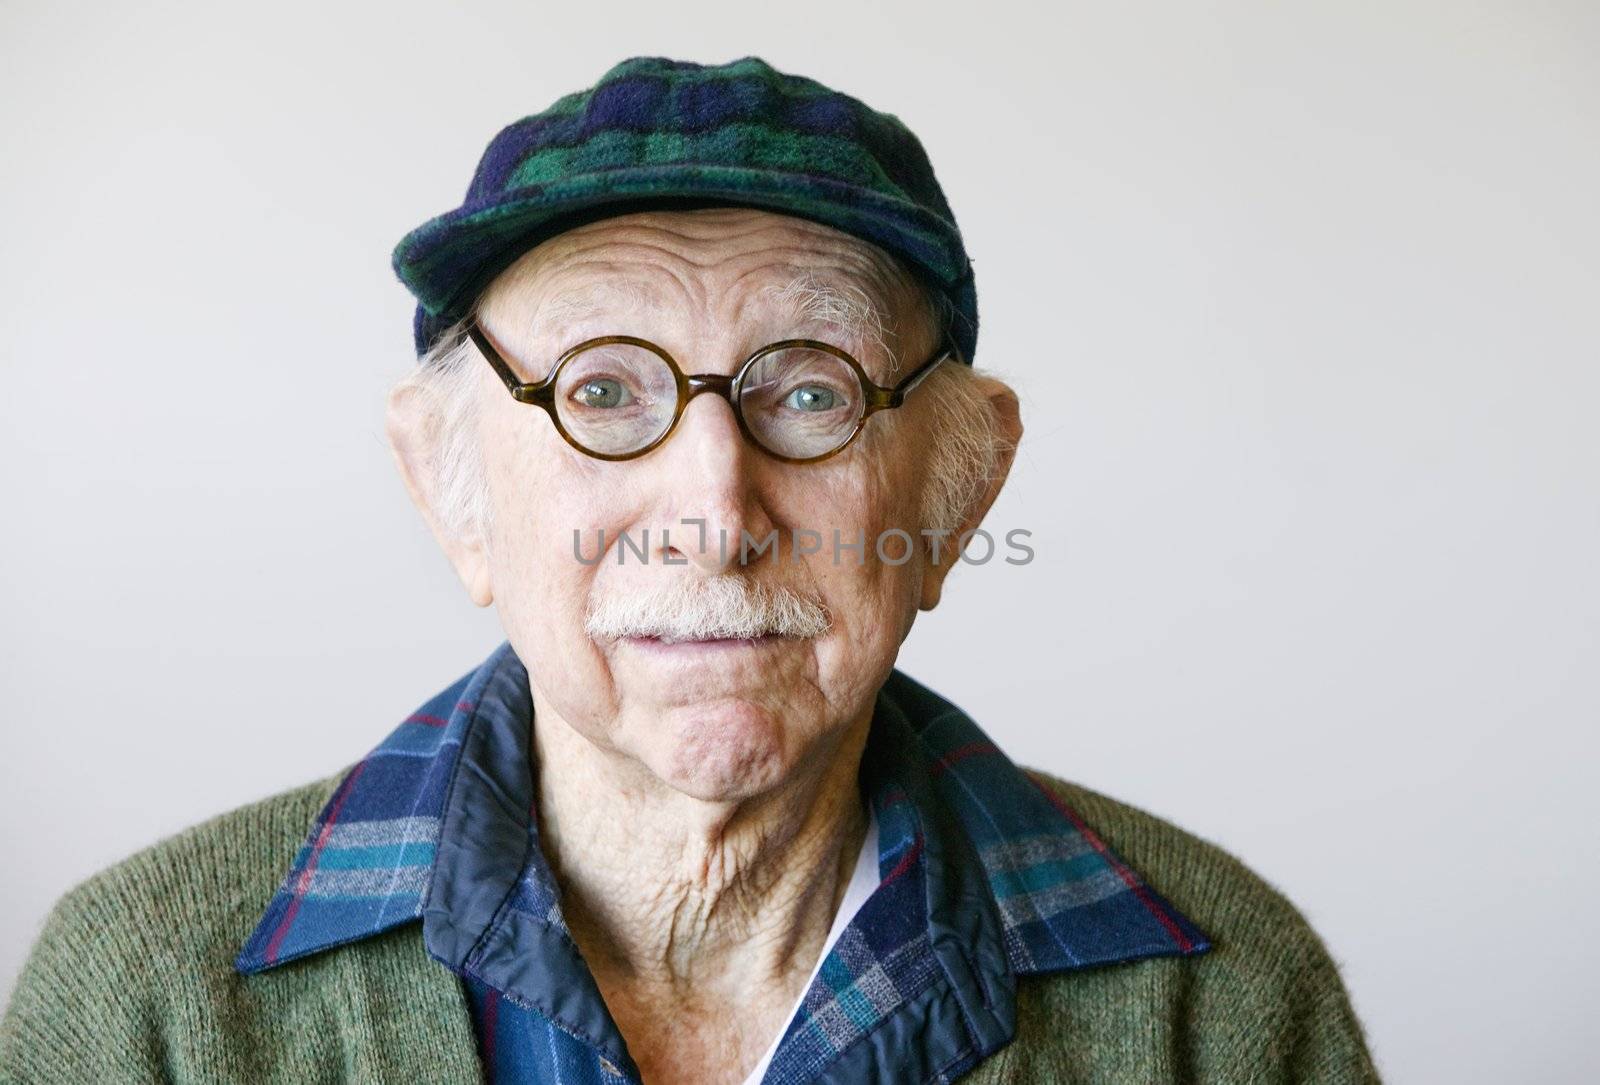 Portrait of a senior citizen wearing glasses and a sweater.